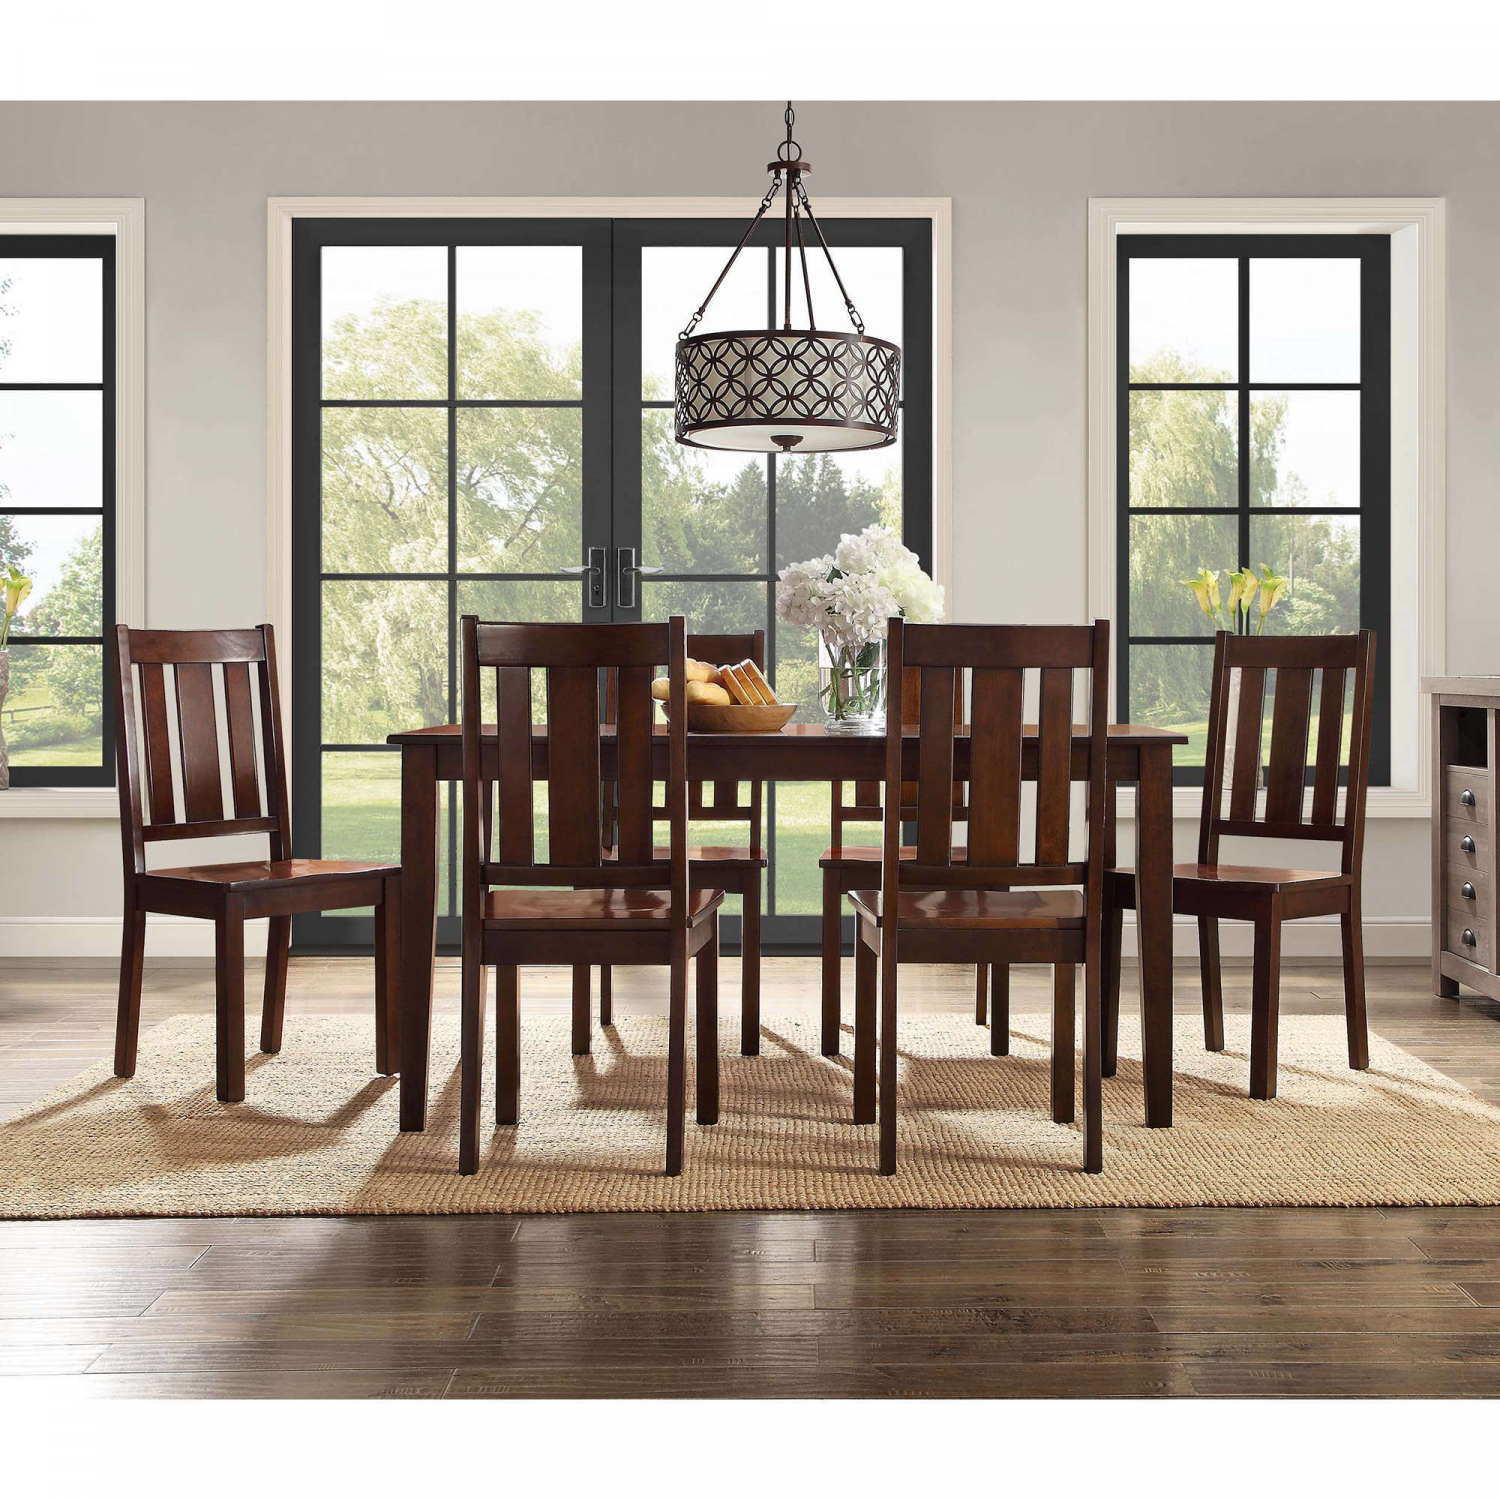 Details About Dining Room Table Set Wooden Kitchen Tables And Chairs Sets Contemporary 7 Piece in proportions 1500 X 1500